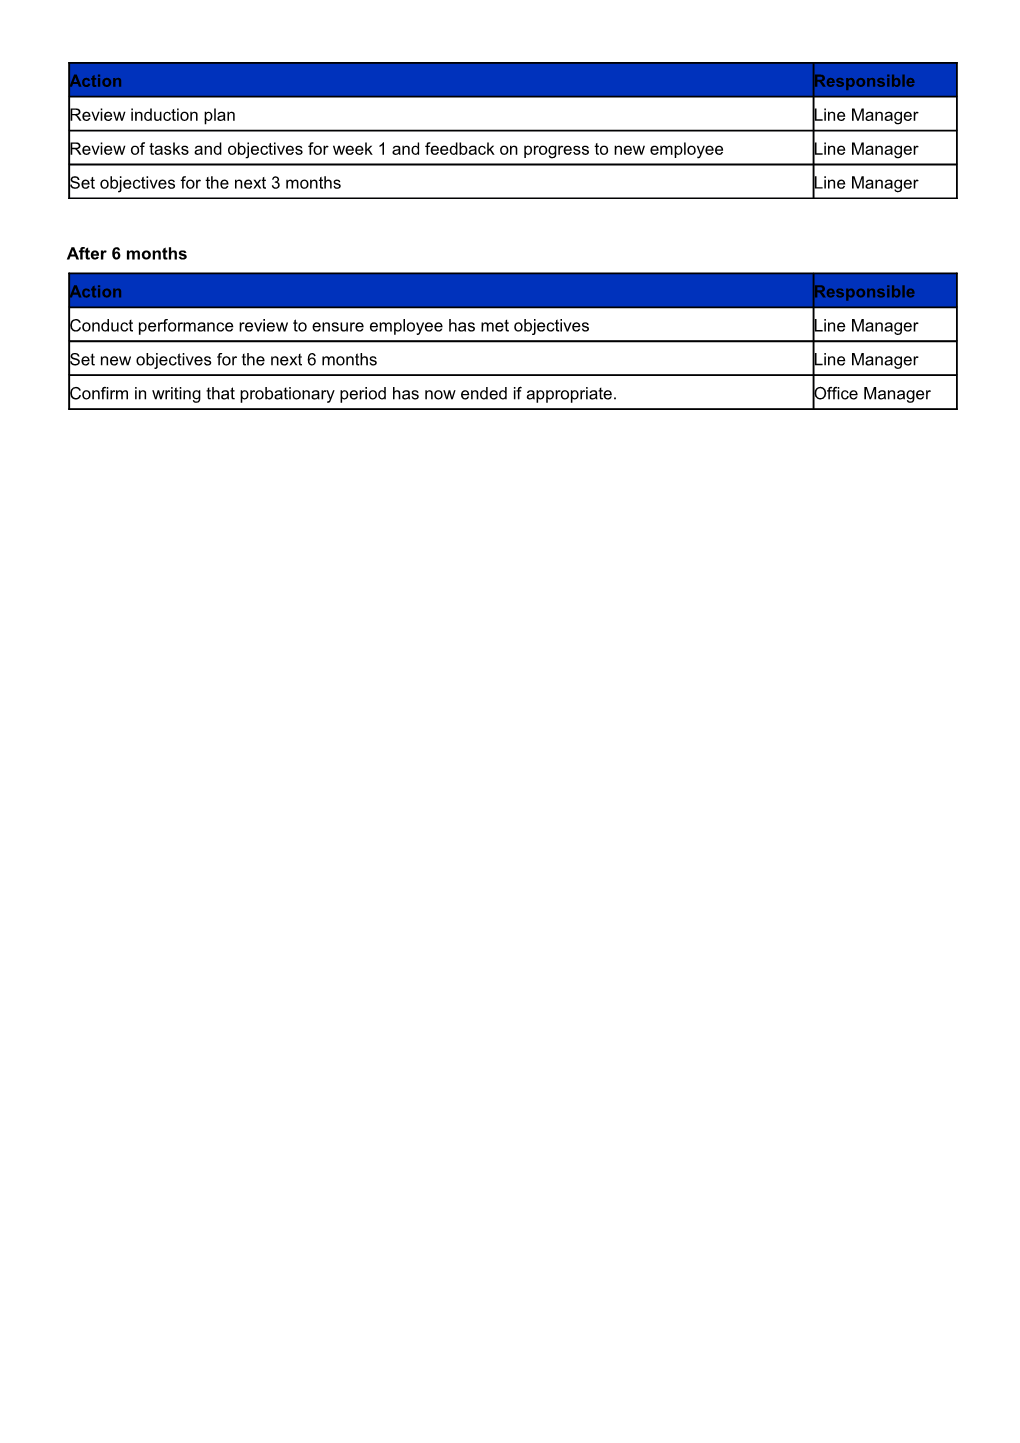 APPENDIX 2Q Business Induction Plan EMPLOYERS HANDBOOK (Remove Comments in Red Before Issuing.)